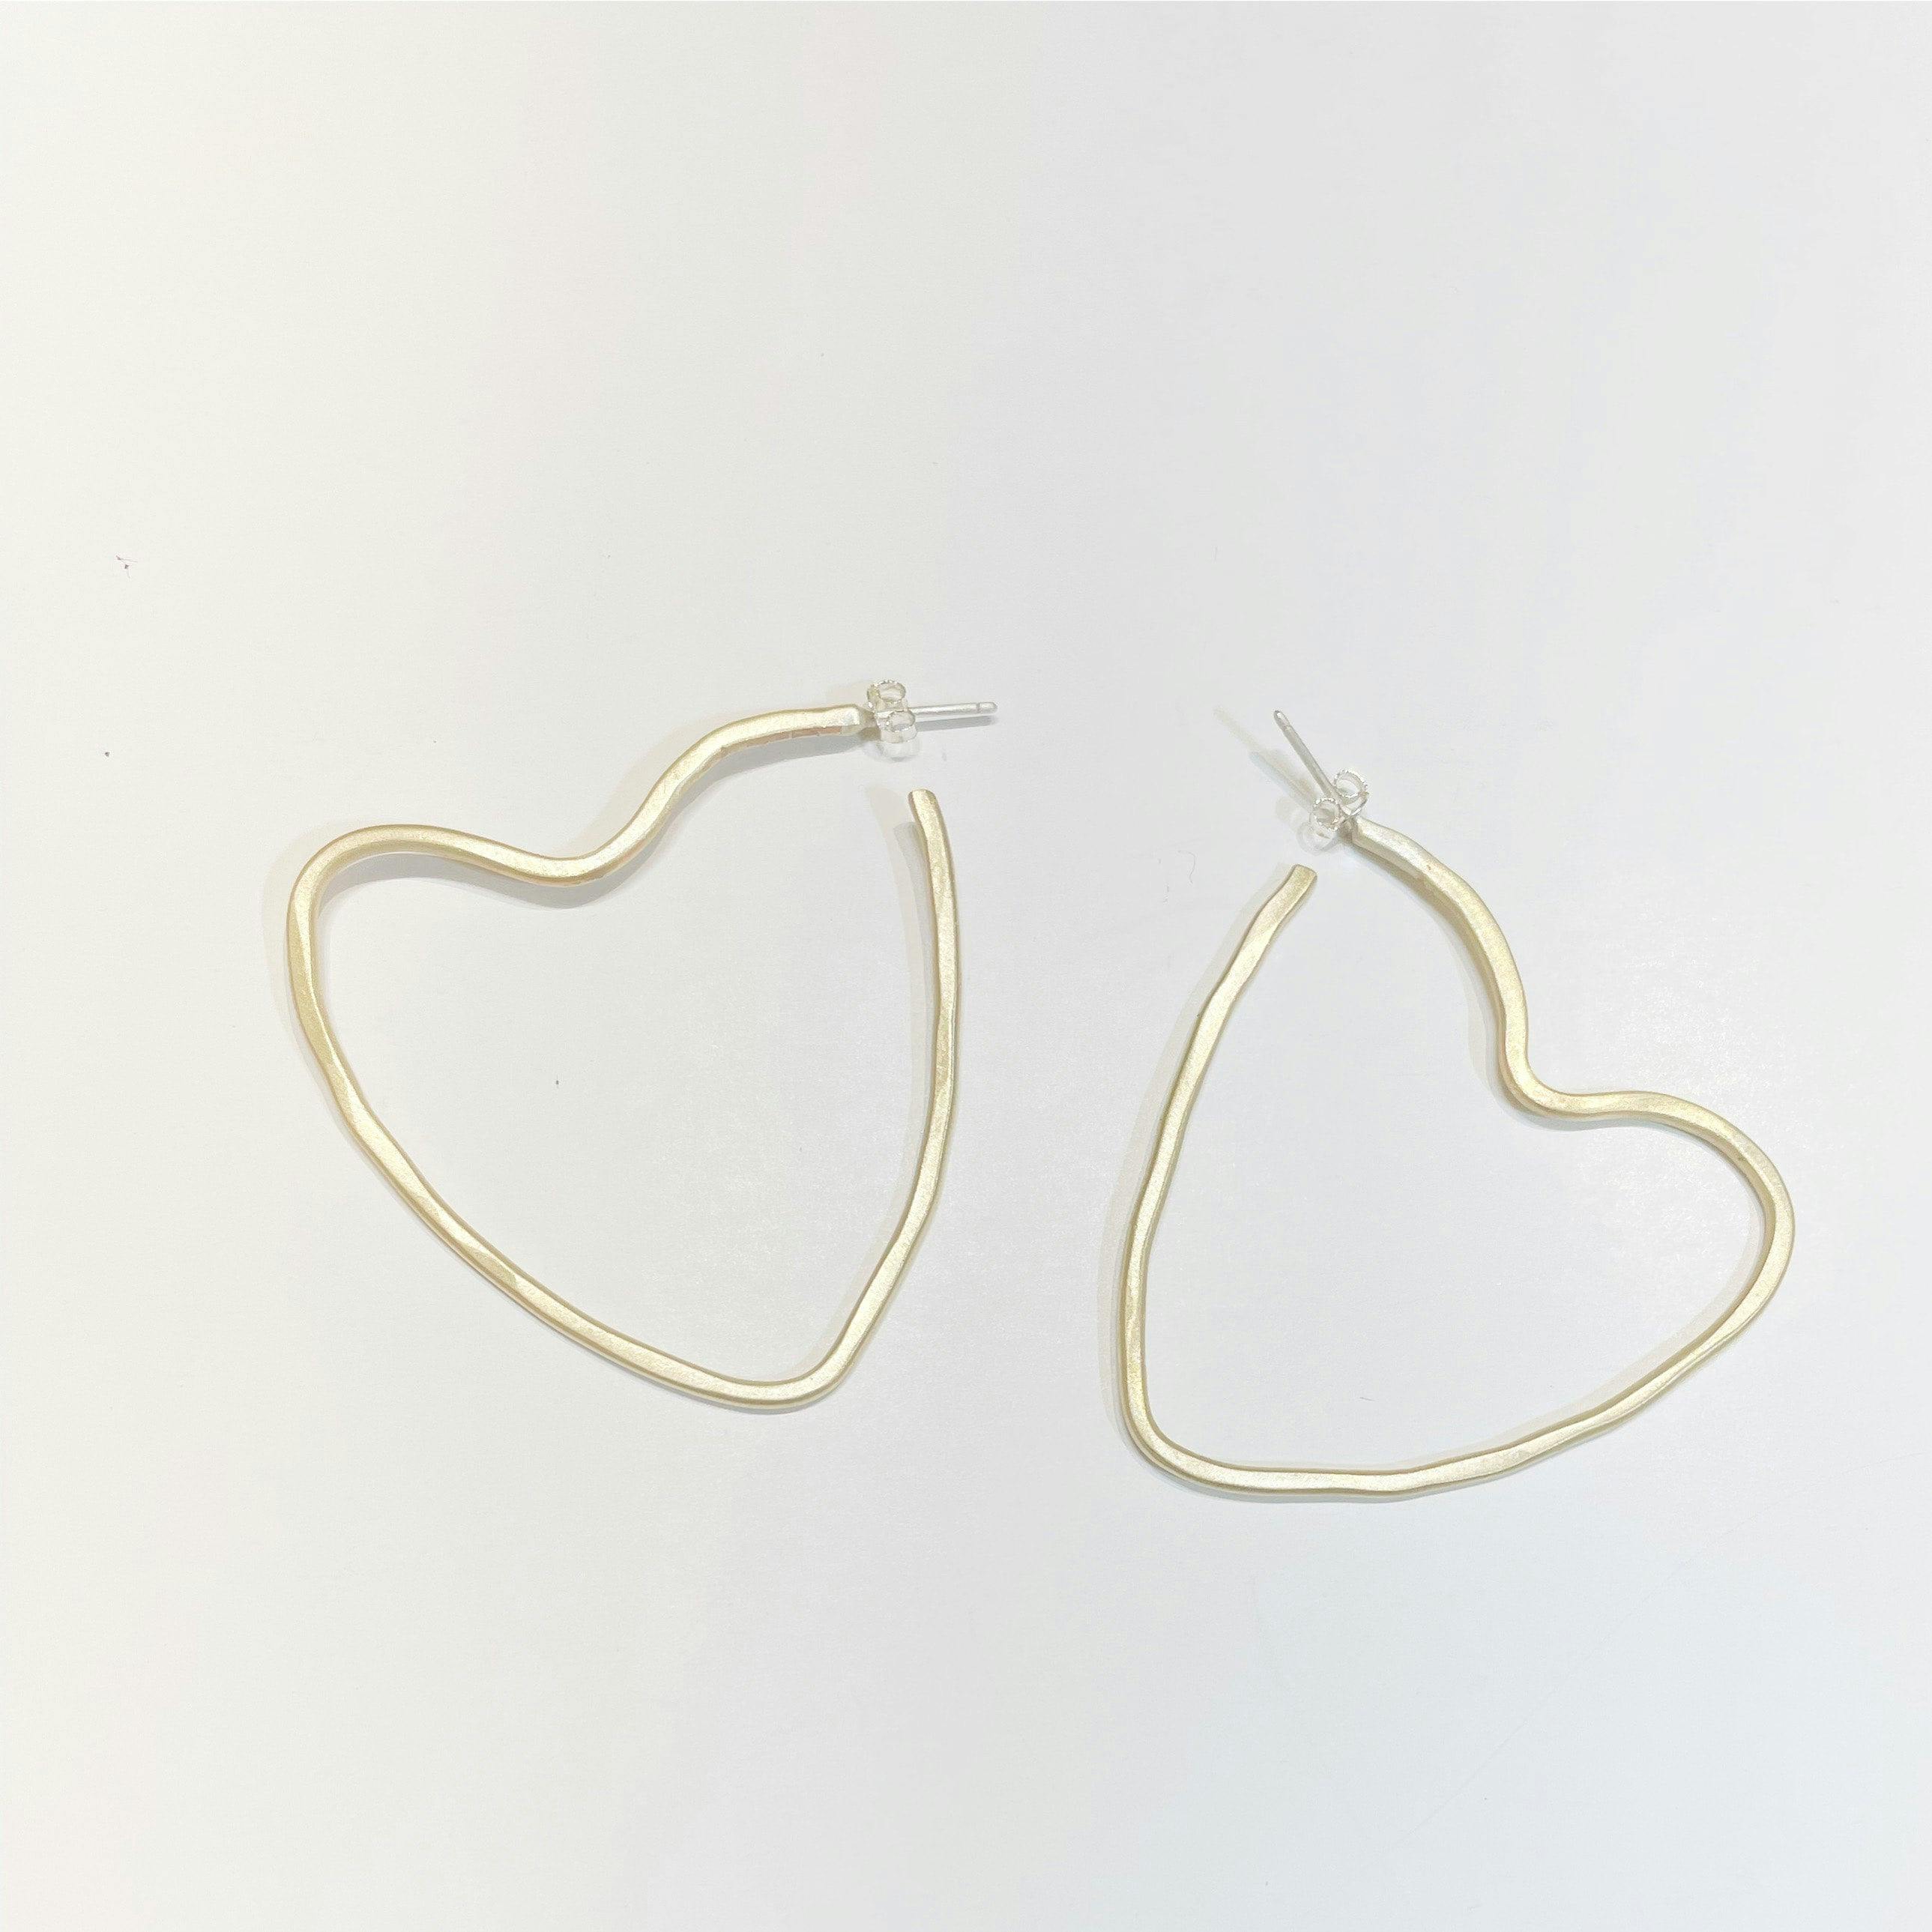 Cara Earrings, a product by Jenny Greco Jewellery